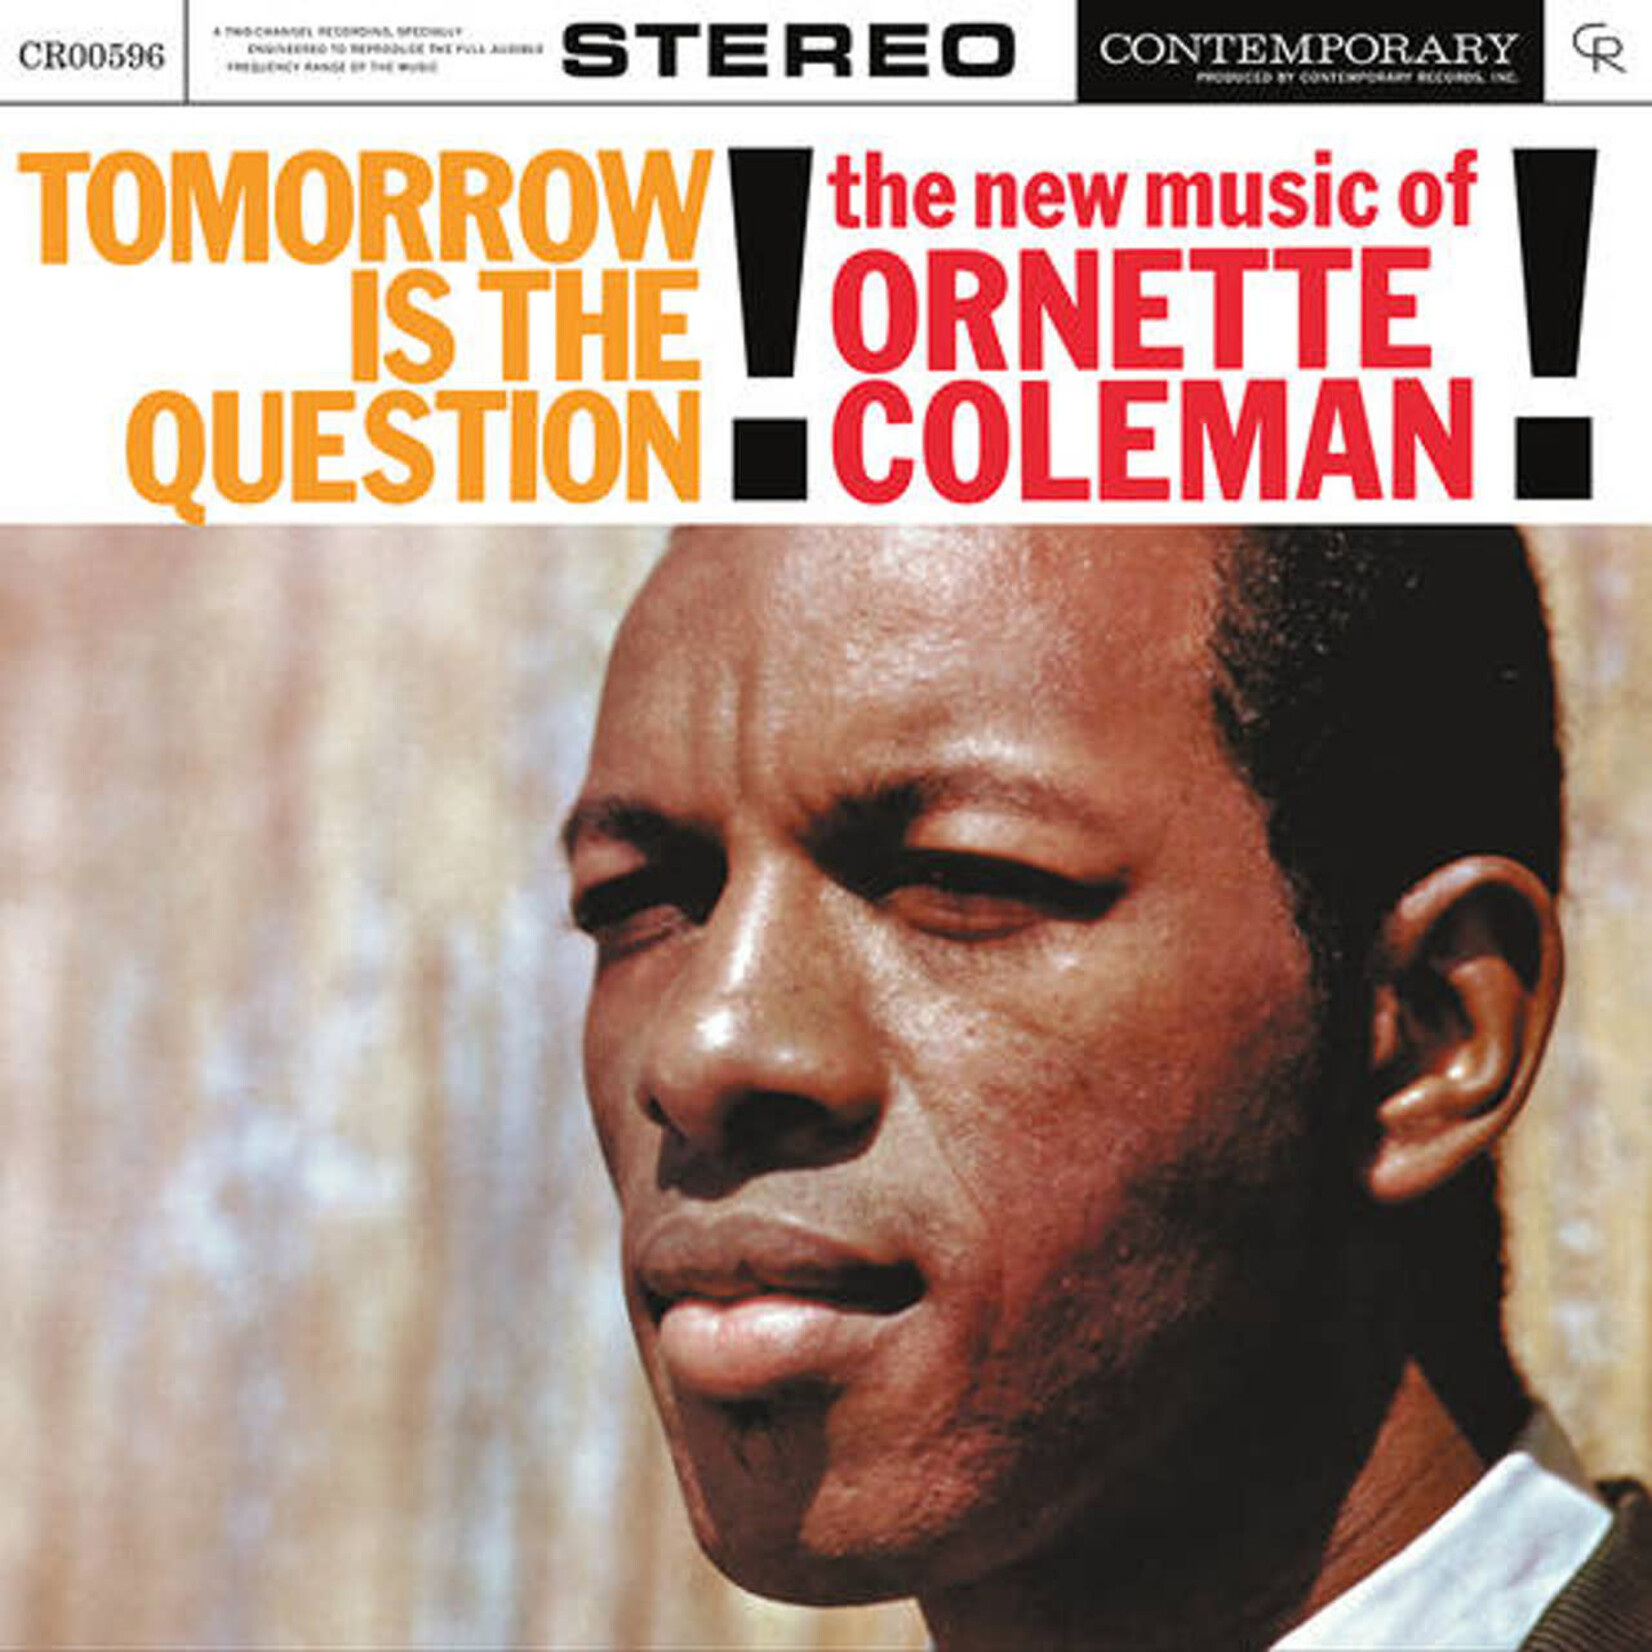 [New] Ornette Coleman - Tomorrow Is The Question! (Contemporary Records Acoustic Sounds series)